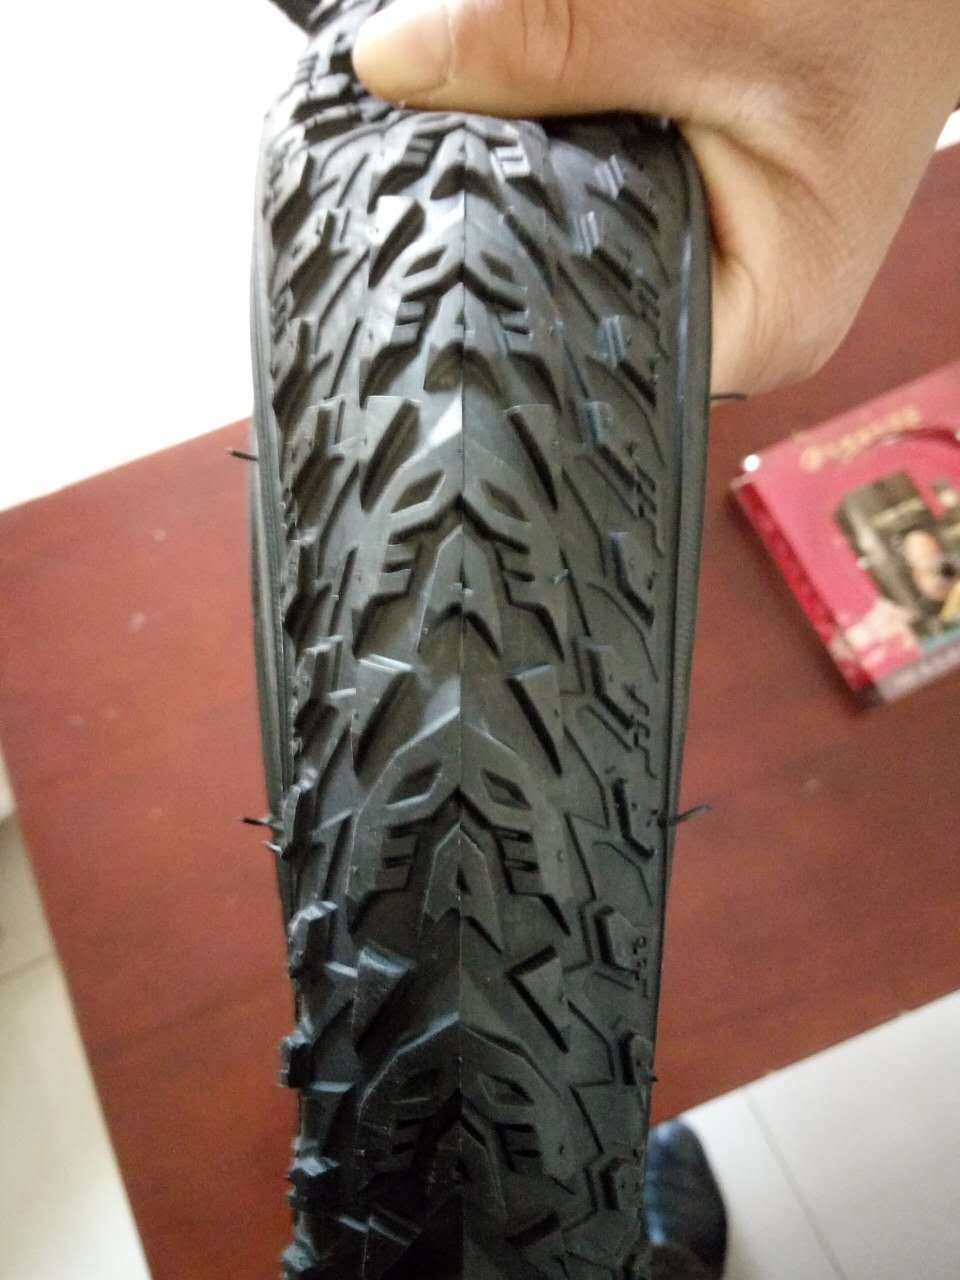 20*1.5 Bicycle Solid Tire Anti Stab Riding MTB Road Bike Tire 20X1.50 Tyre Folding Bicycle Tyres Bike Tyres